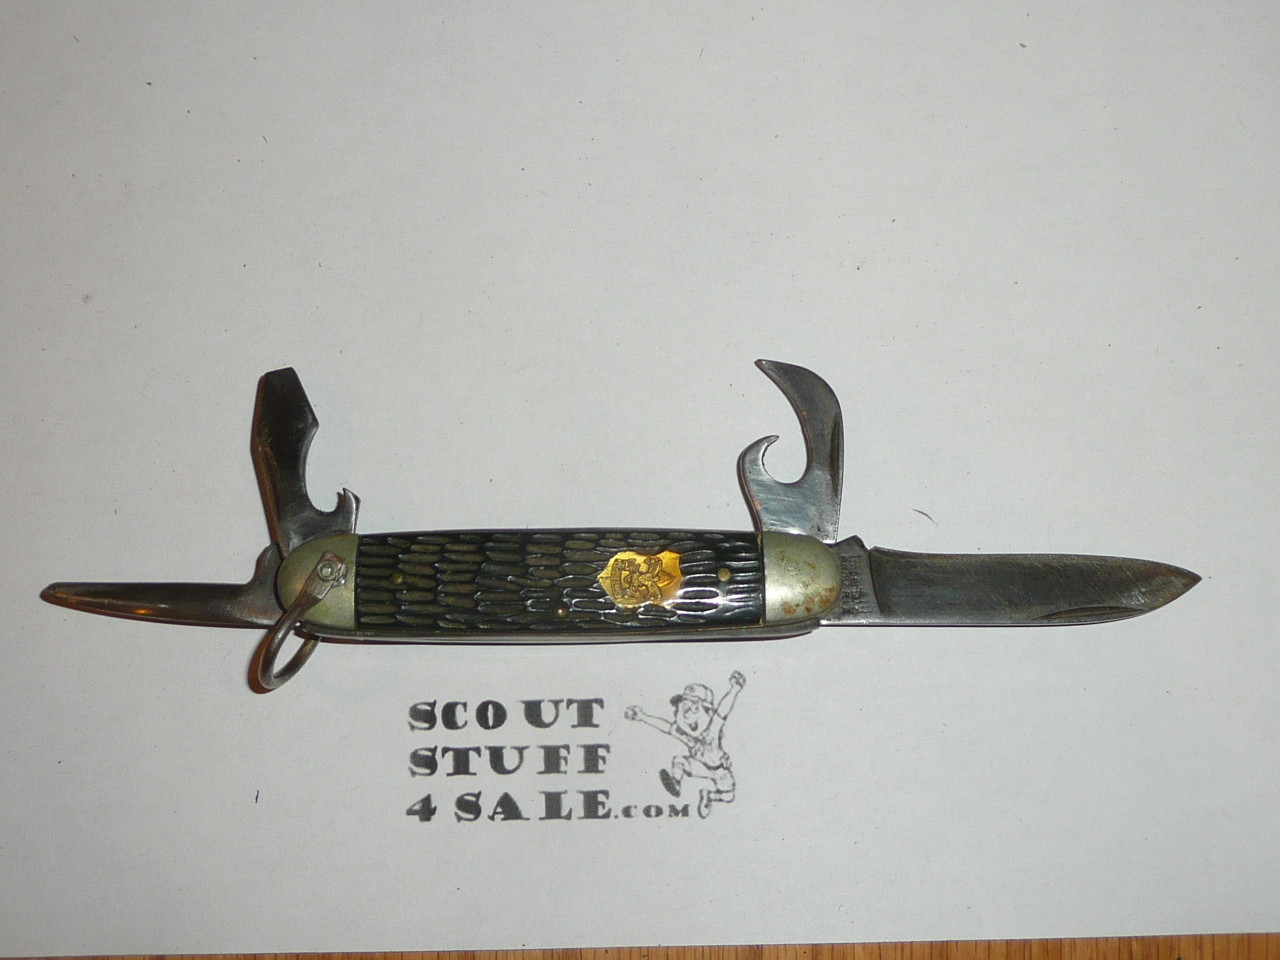 Boy Scout Knife, Imperial Manufacturer, Used but in good shape (CSE27)